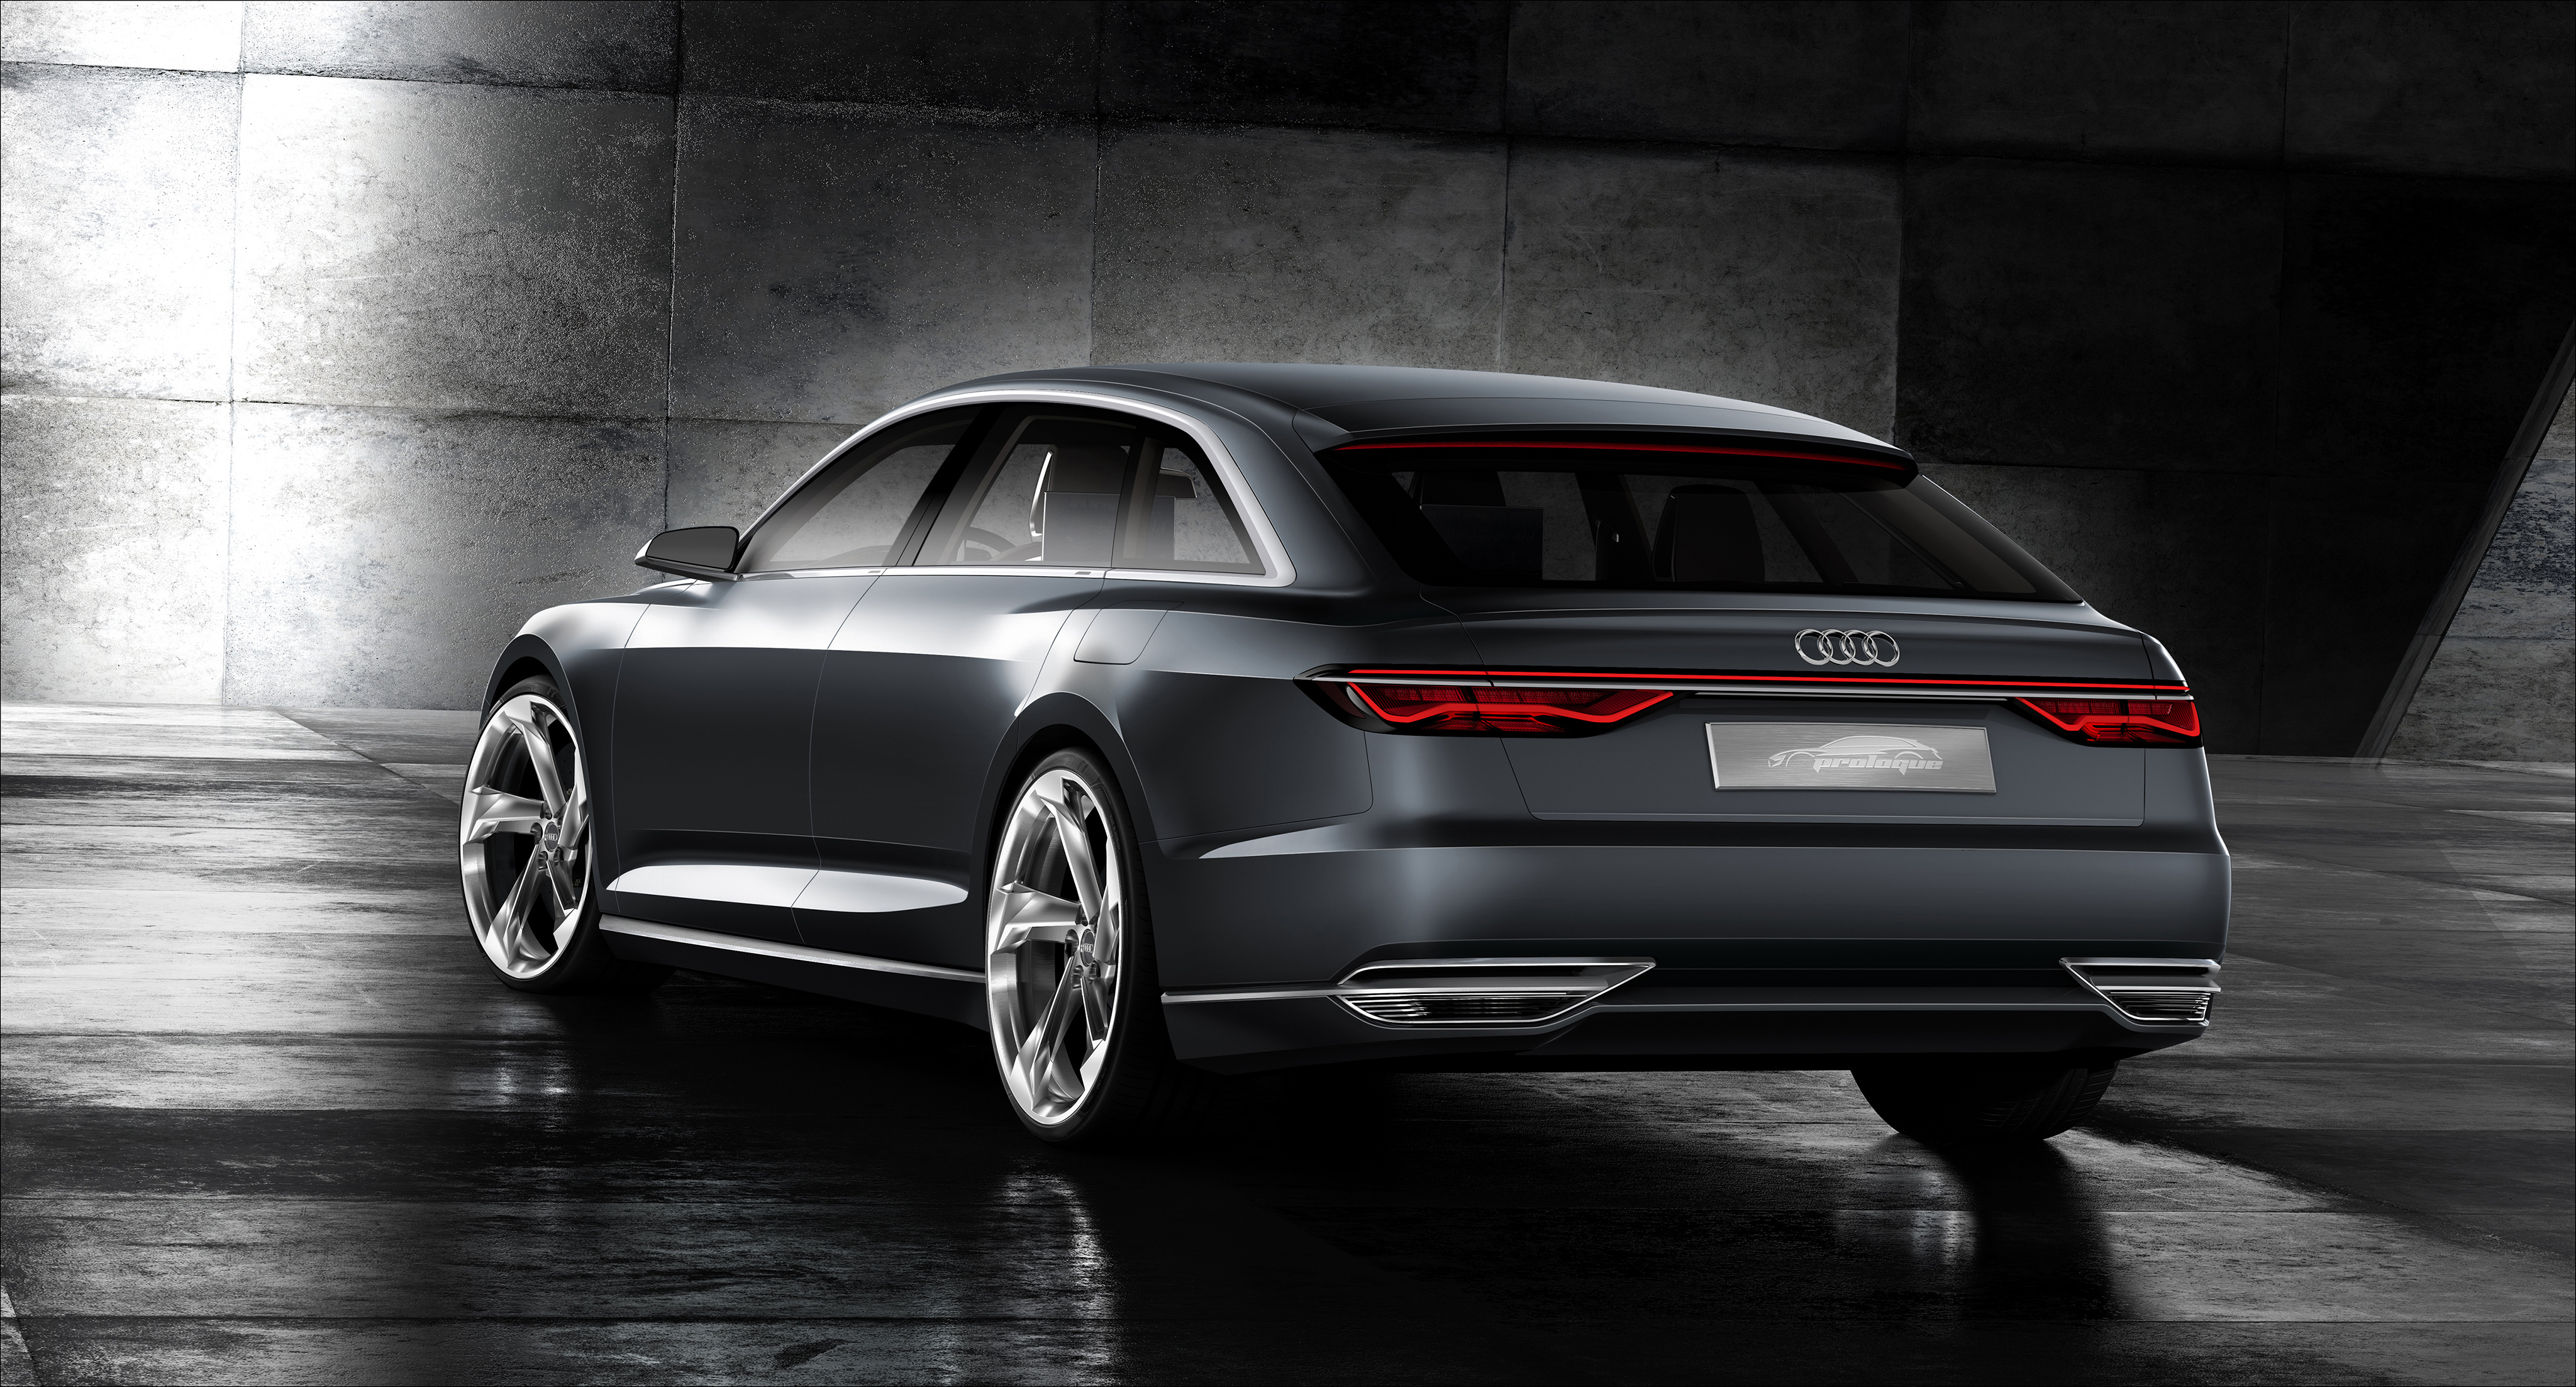 2017 Audi A6 Avant Wallpapers For Android Wantingseedcom